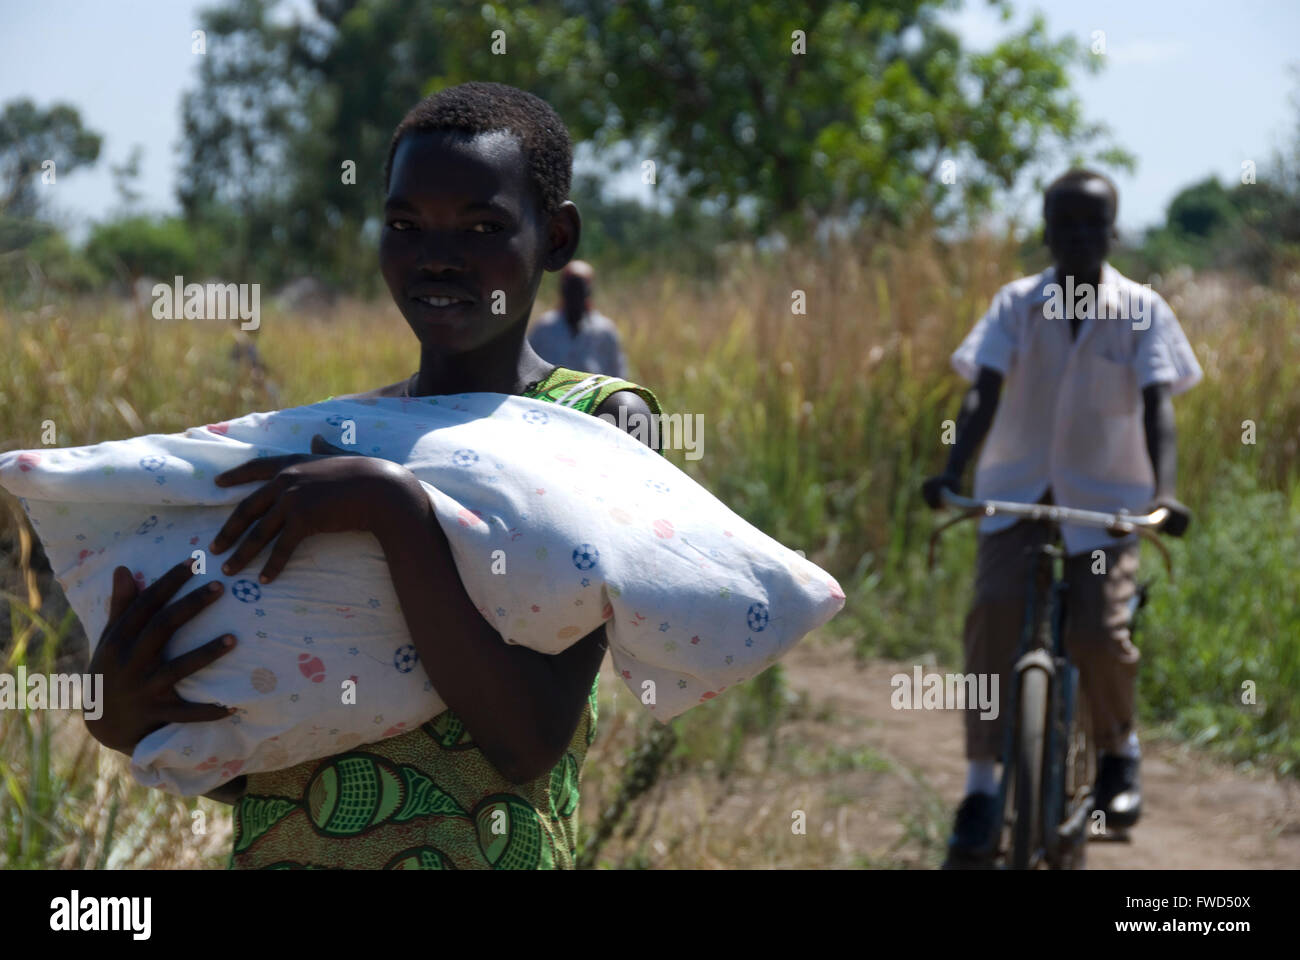 Lacekocot, Pader, Uganda.  Acholi  man and woman at the Lacekocot IDP Camp go about their business. The man is on a bicycle. Stock Photo